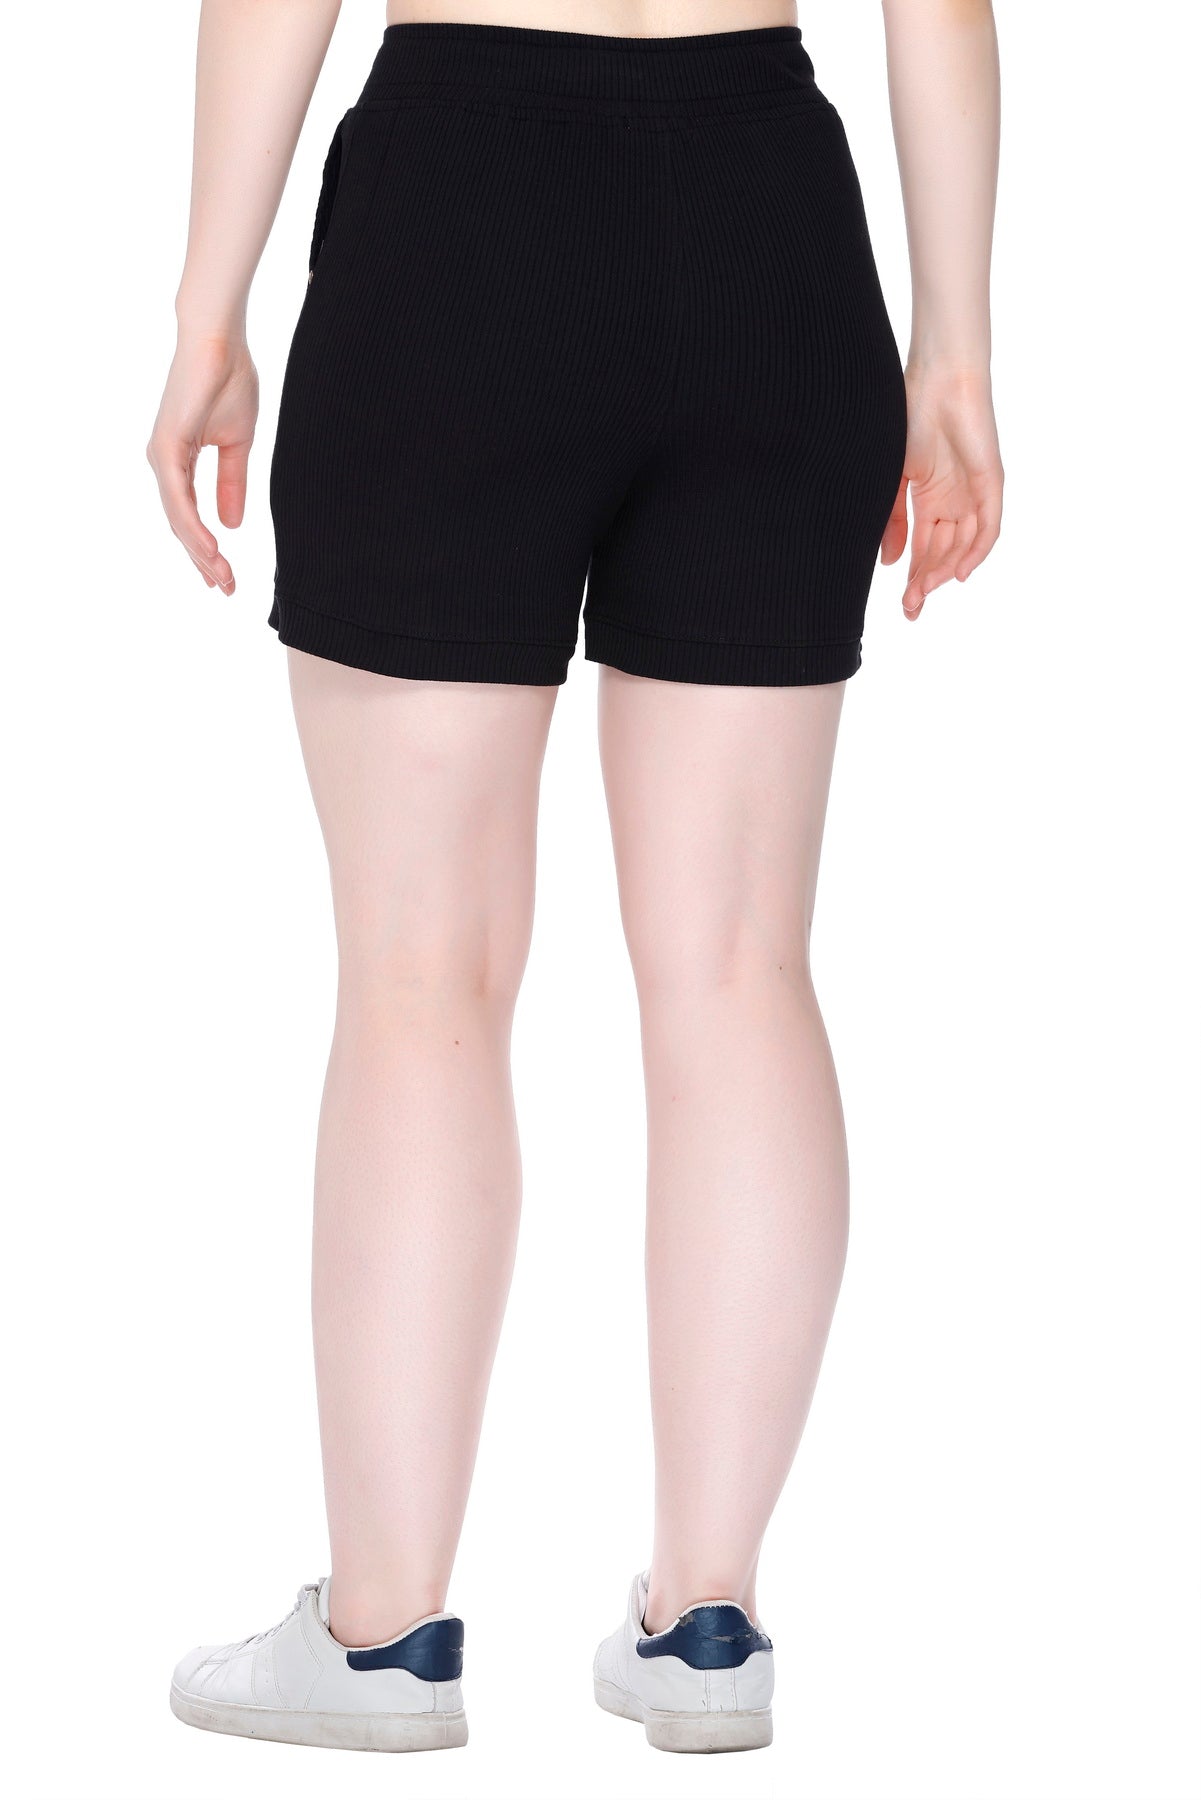 Stylish Plain Black Cotton shorts For Women Online In India